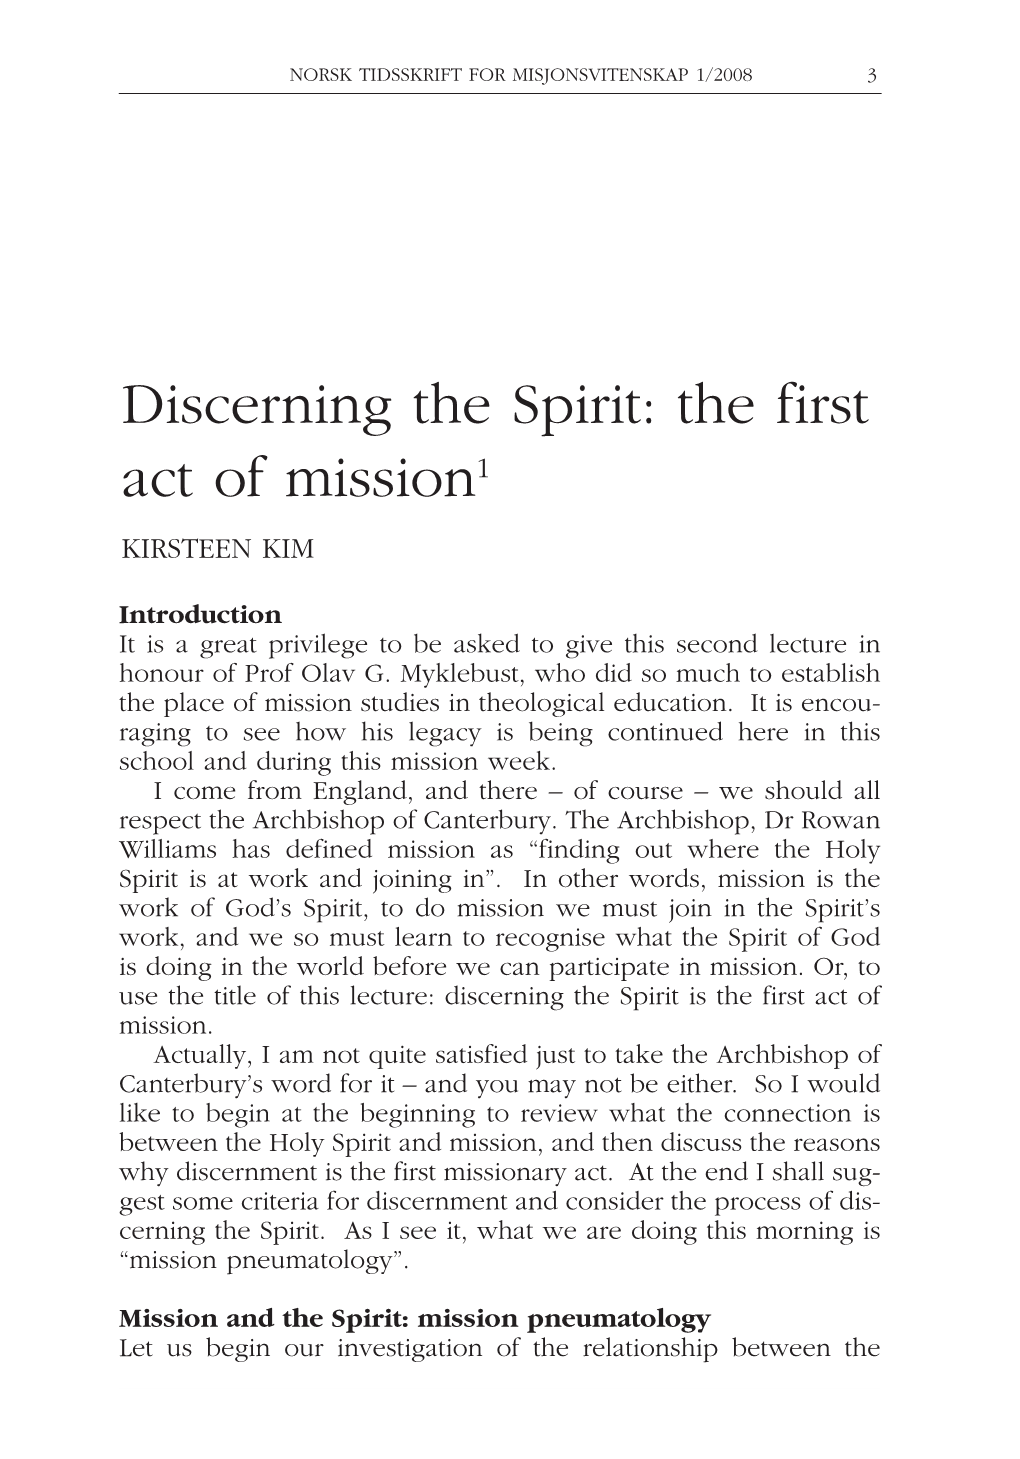 Discerning the Spirit: the First Act of Mission1